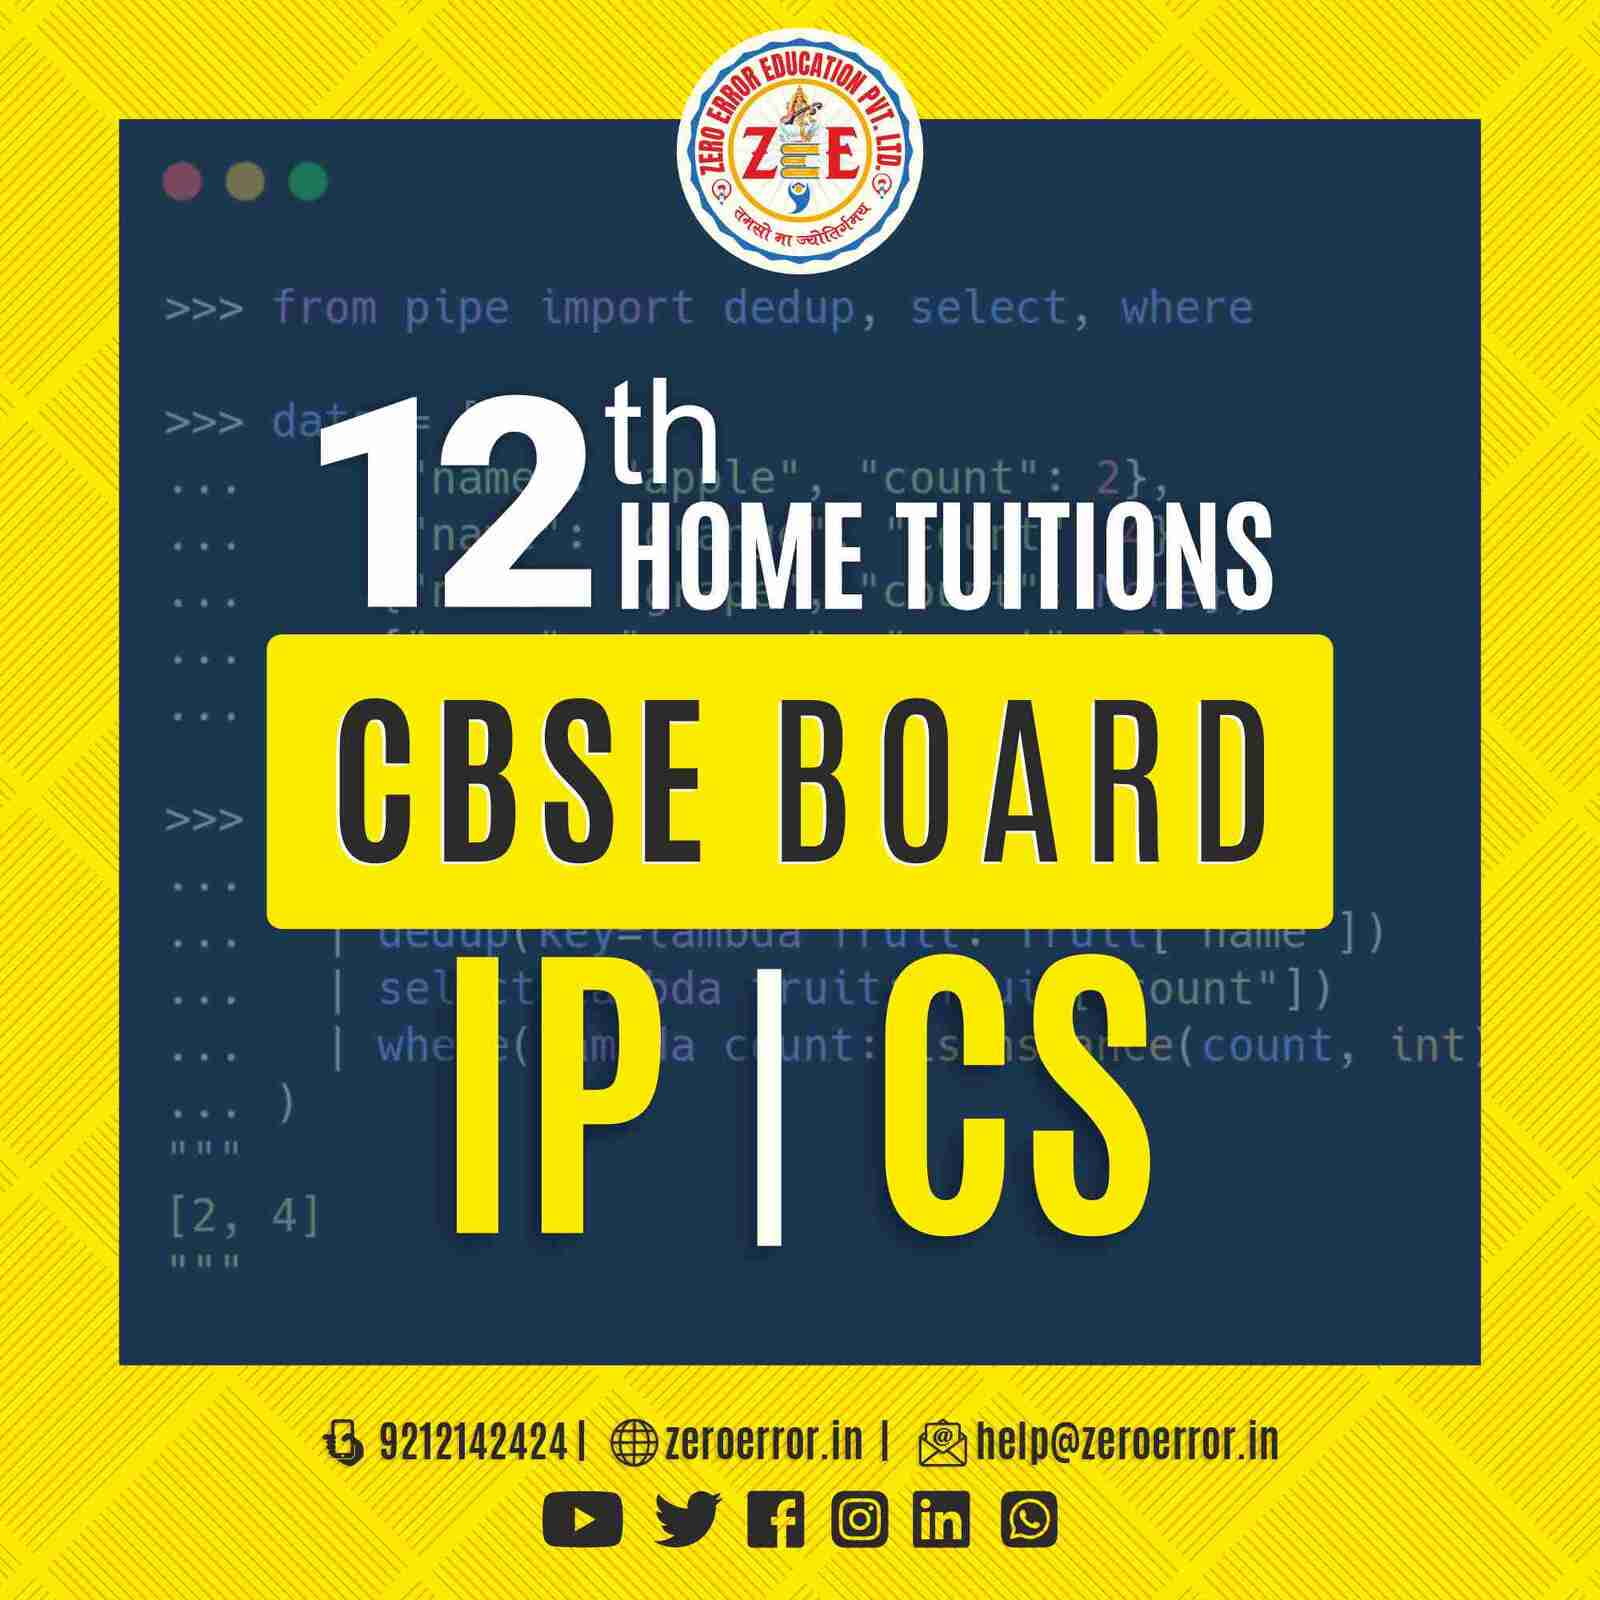 12th Grade CBSE IP | CS Online Classes by Zero Error Education Prepare for your CBSE board exams with online and offline IP | CS classes for 12th grade. Learn from experienced home tutors and get all the help you need to succeed. Enroll today at Zero Error Education. [https://zeroerror.in/] Call 9212142424 for more information.